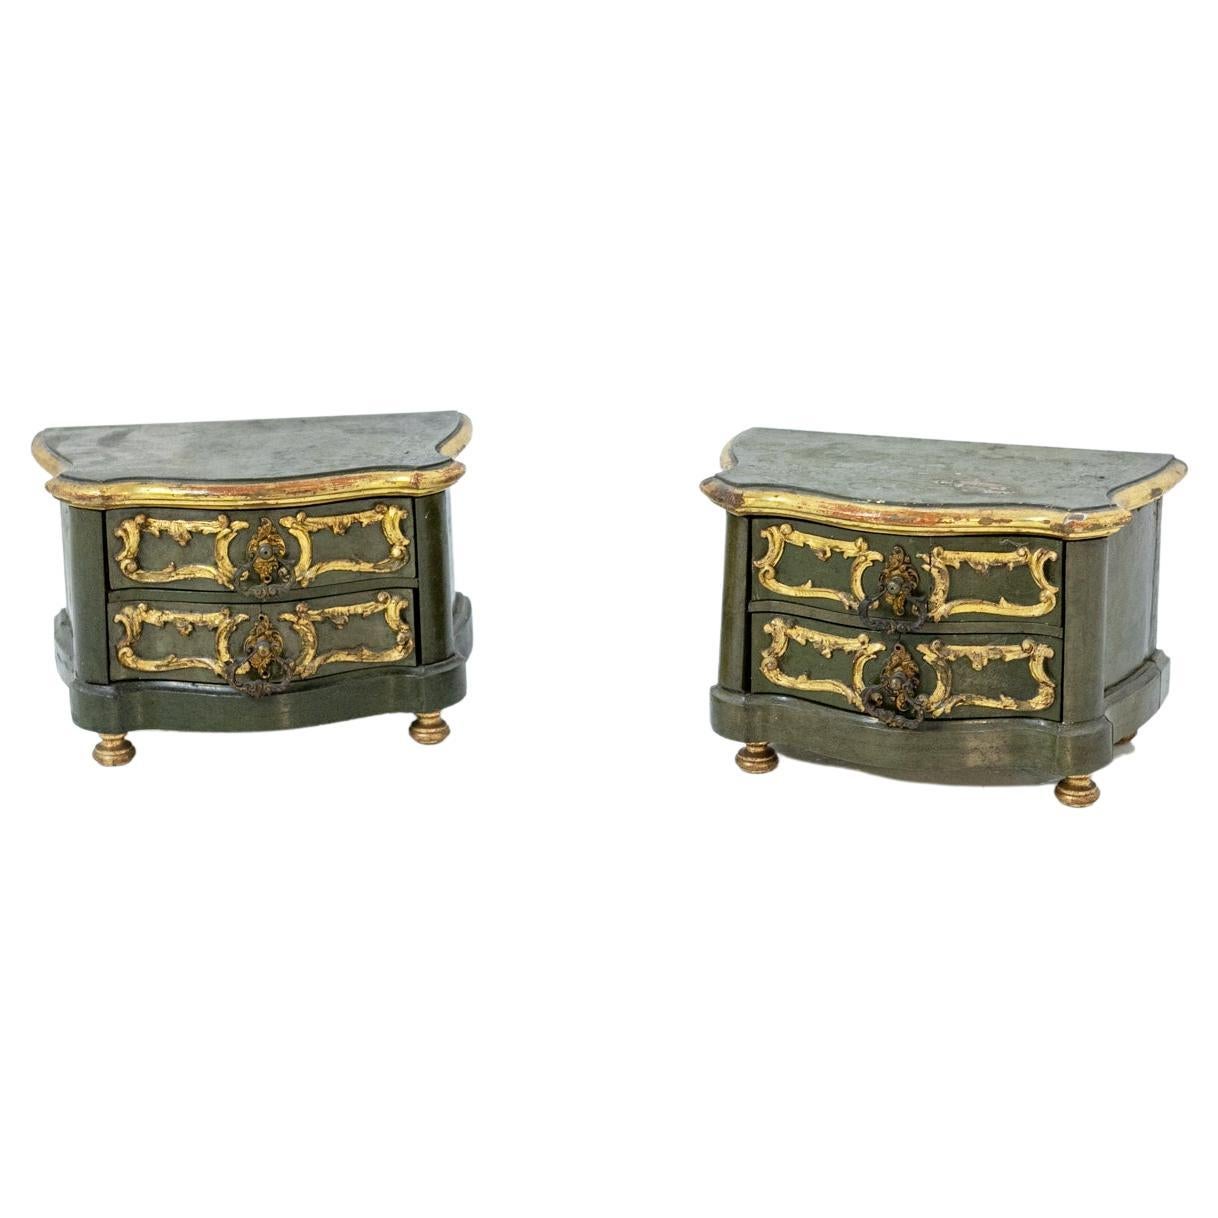 Pair of Vintage Gold Lacquered Wood Jewel Boxes